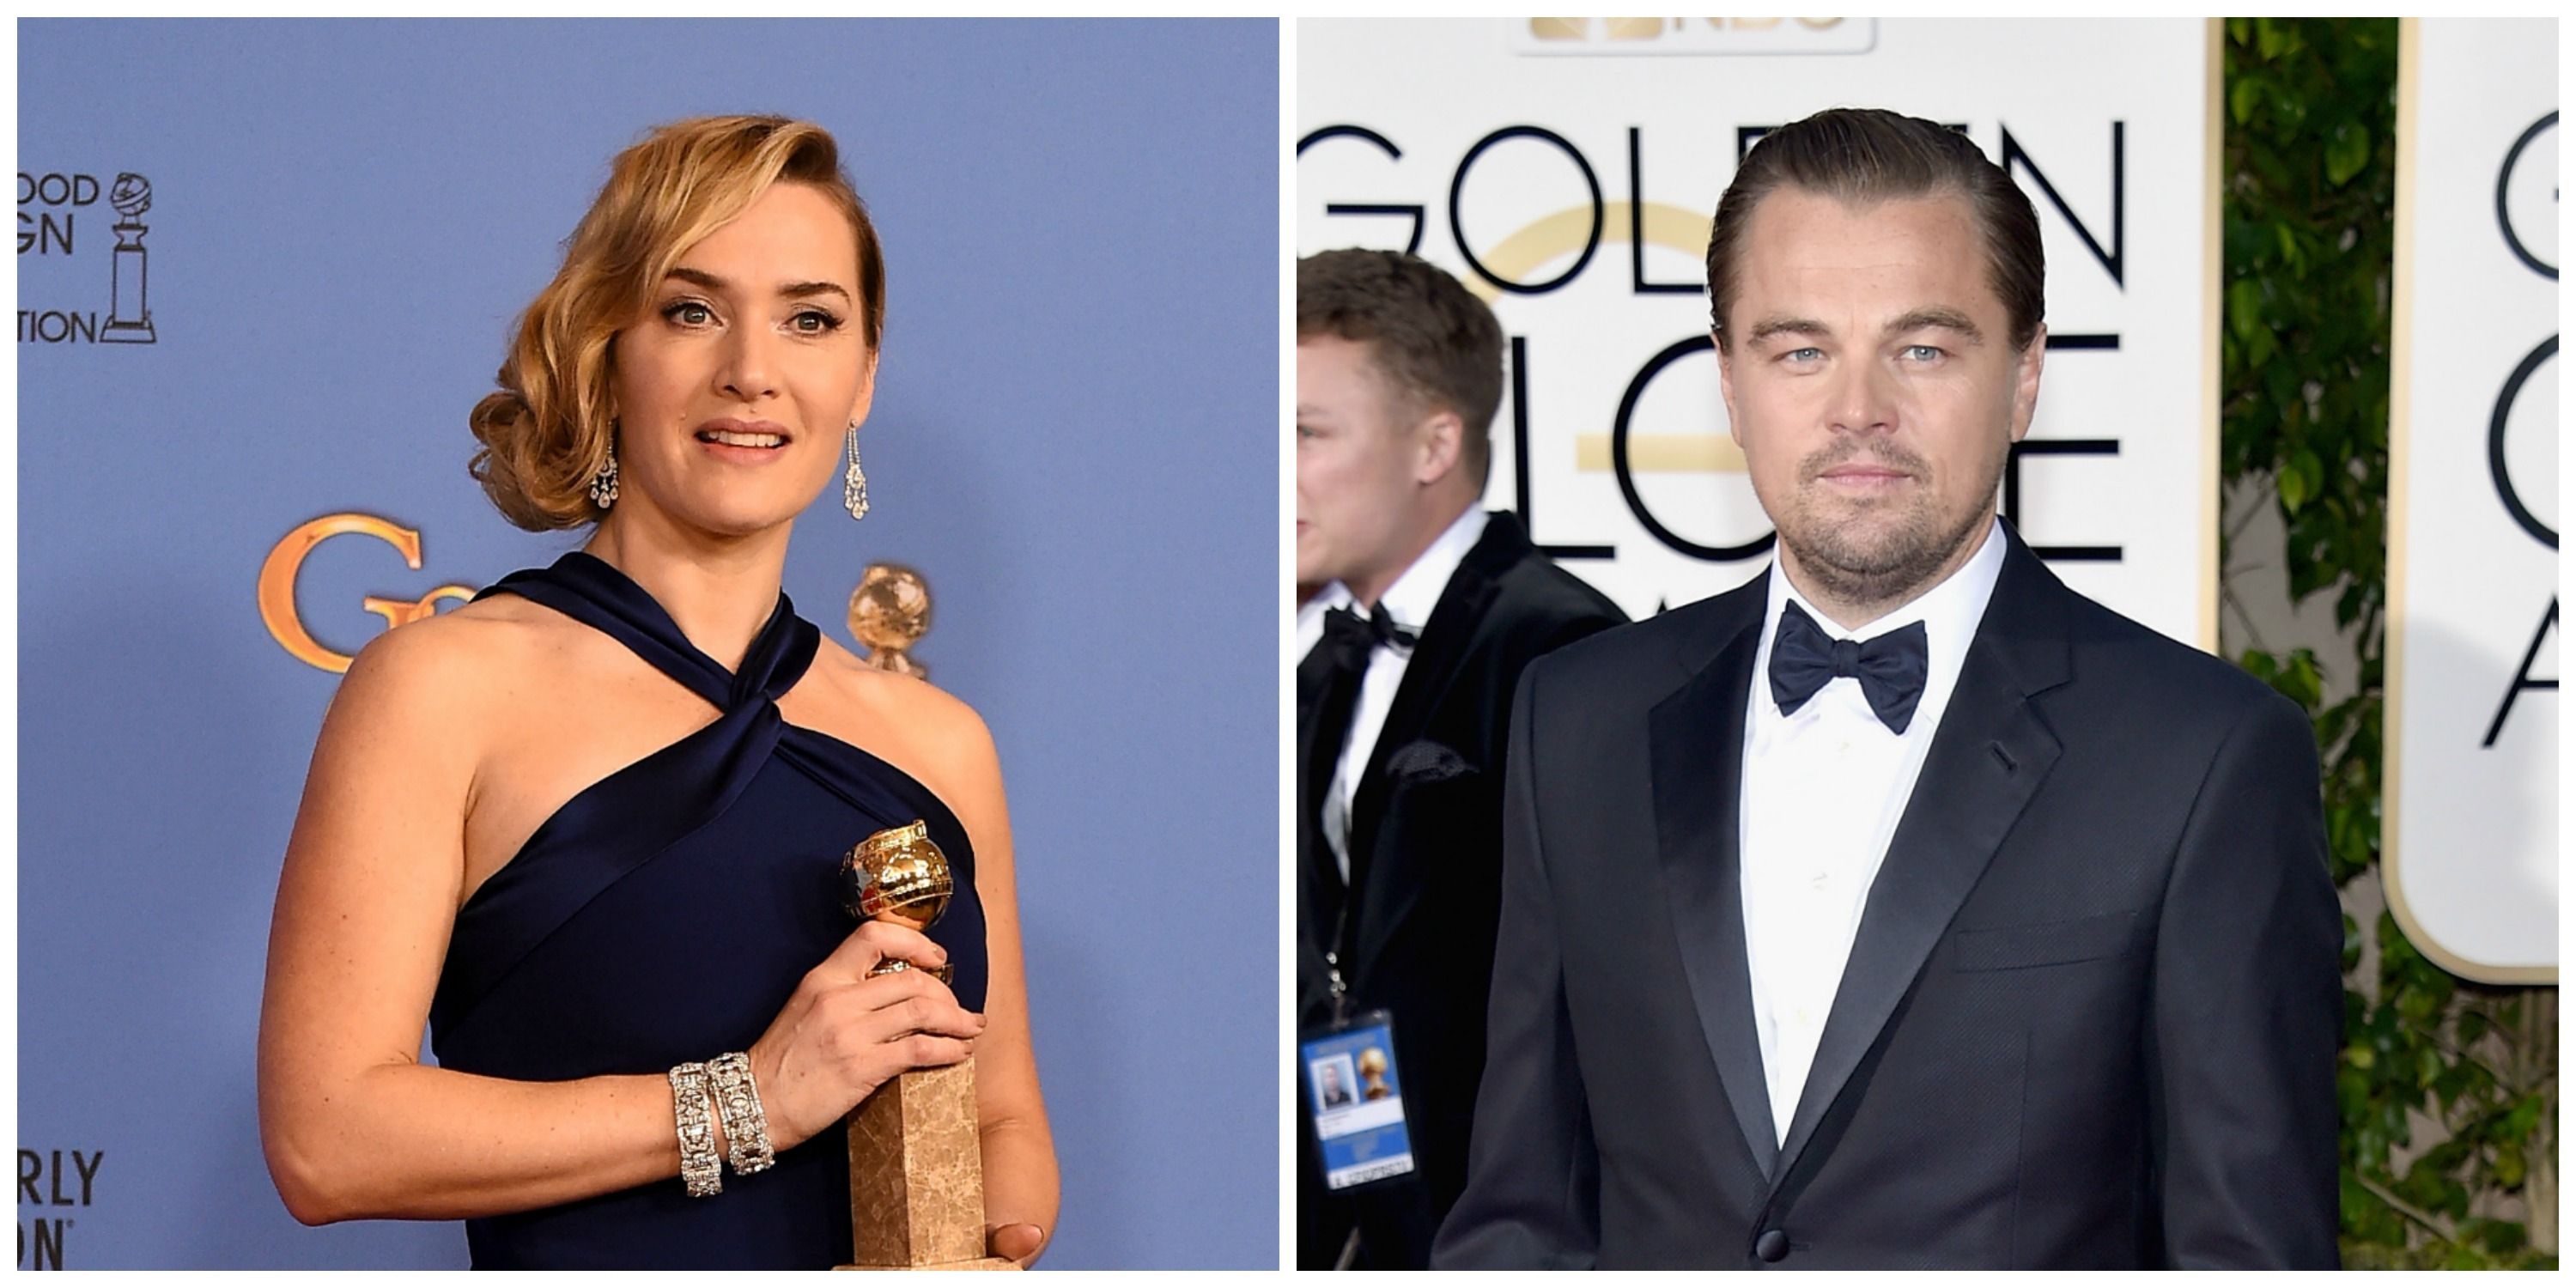 Leonardo DiCaprio & Kate Winslet at Golden Globes 2016 - Fashion Style Trends 20193000 x 1500